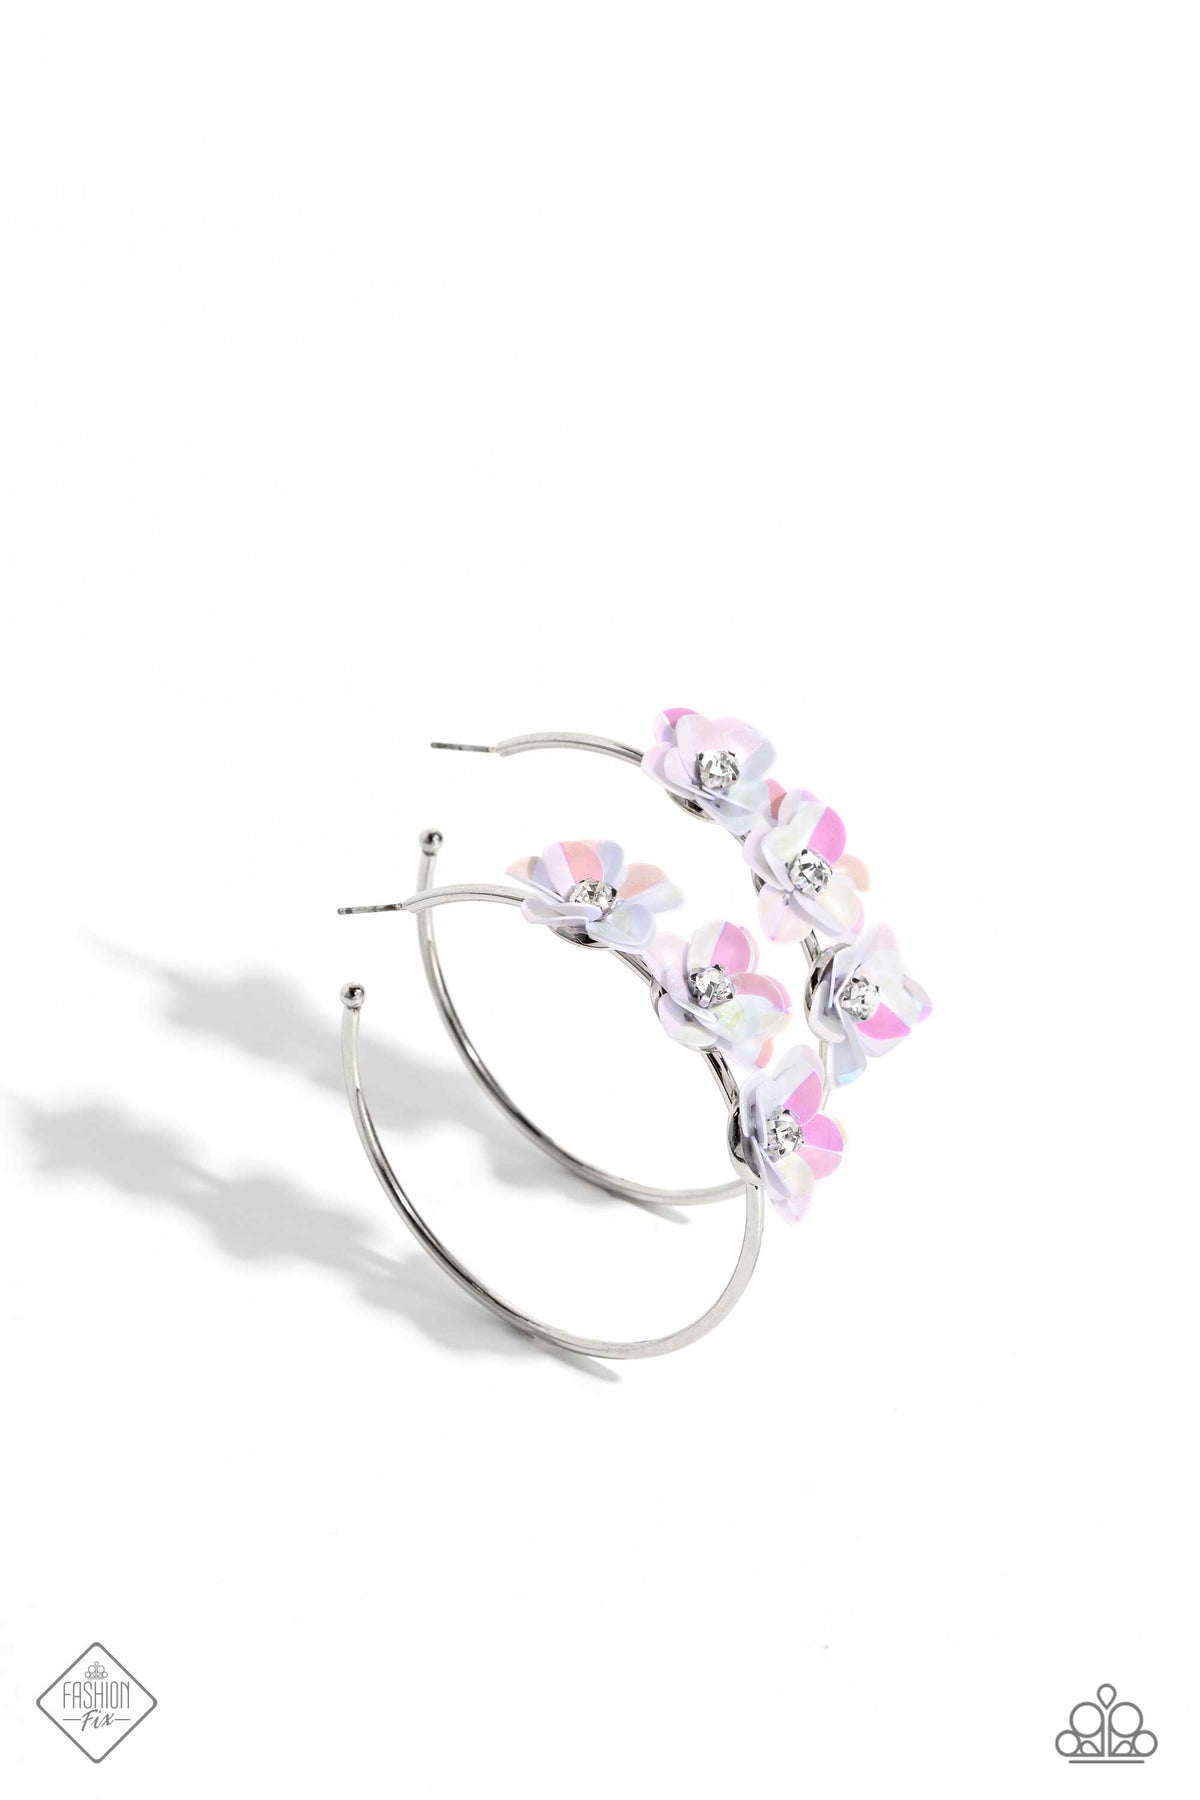 Ethereal Embellishment Multi Floral Hoop Earrings - Paparazzi Accessories- lightbox - CarasShop.com - $5 Jewelry by Cara Jewels